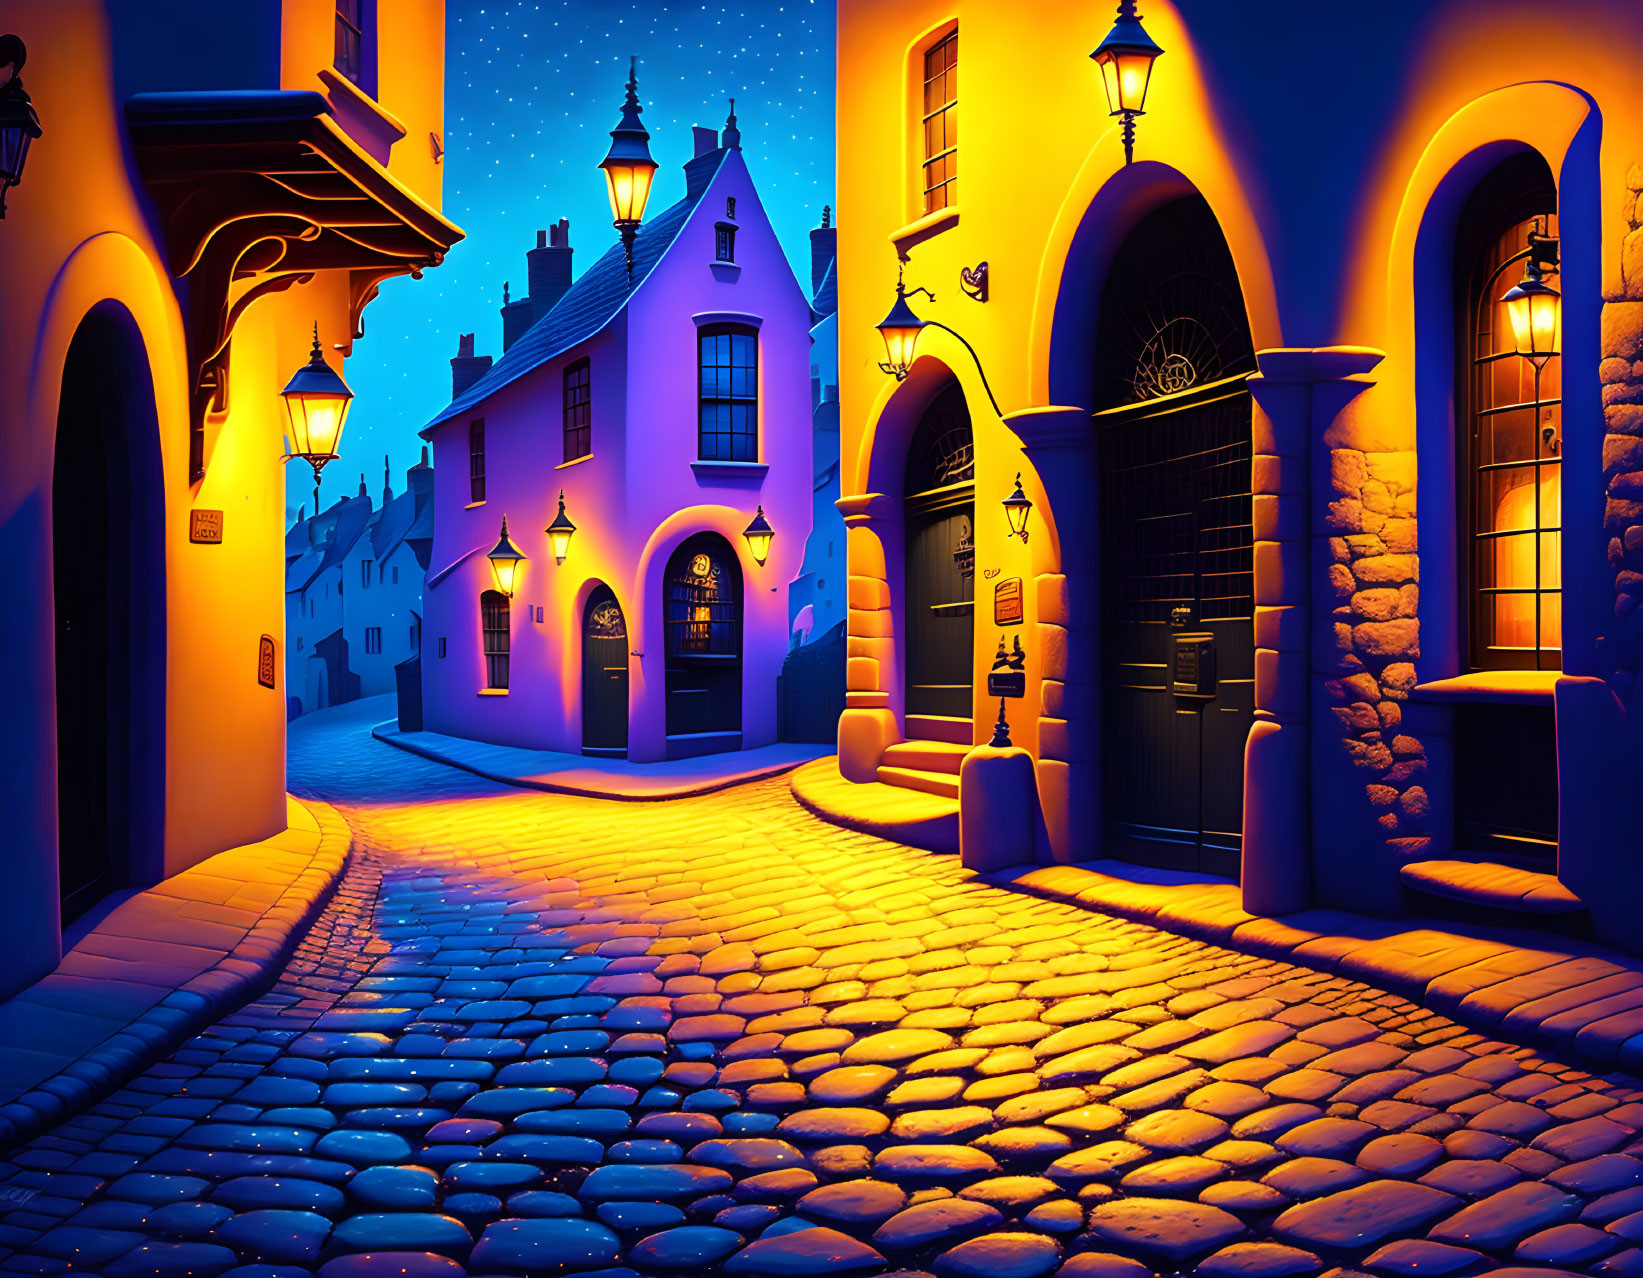 Charming cobblestone street at night with warm yellow and cool blue lights